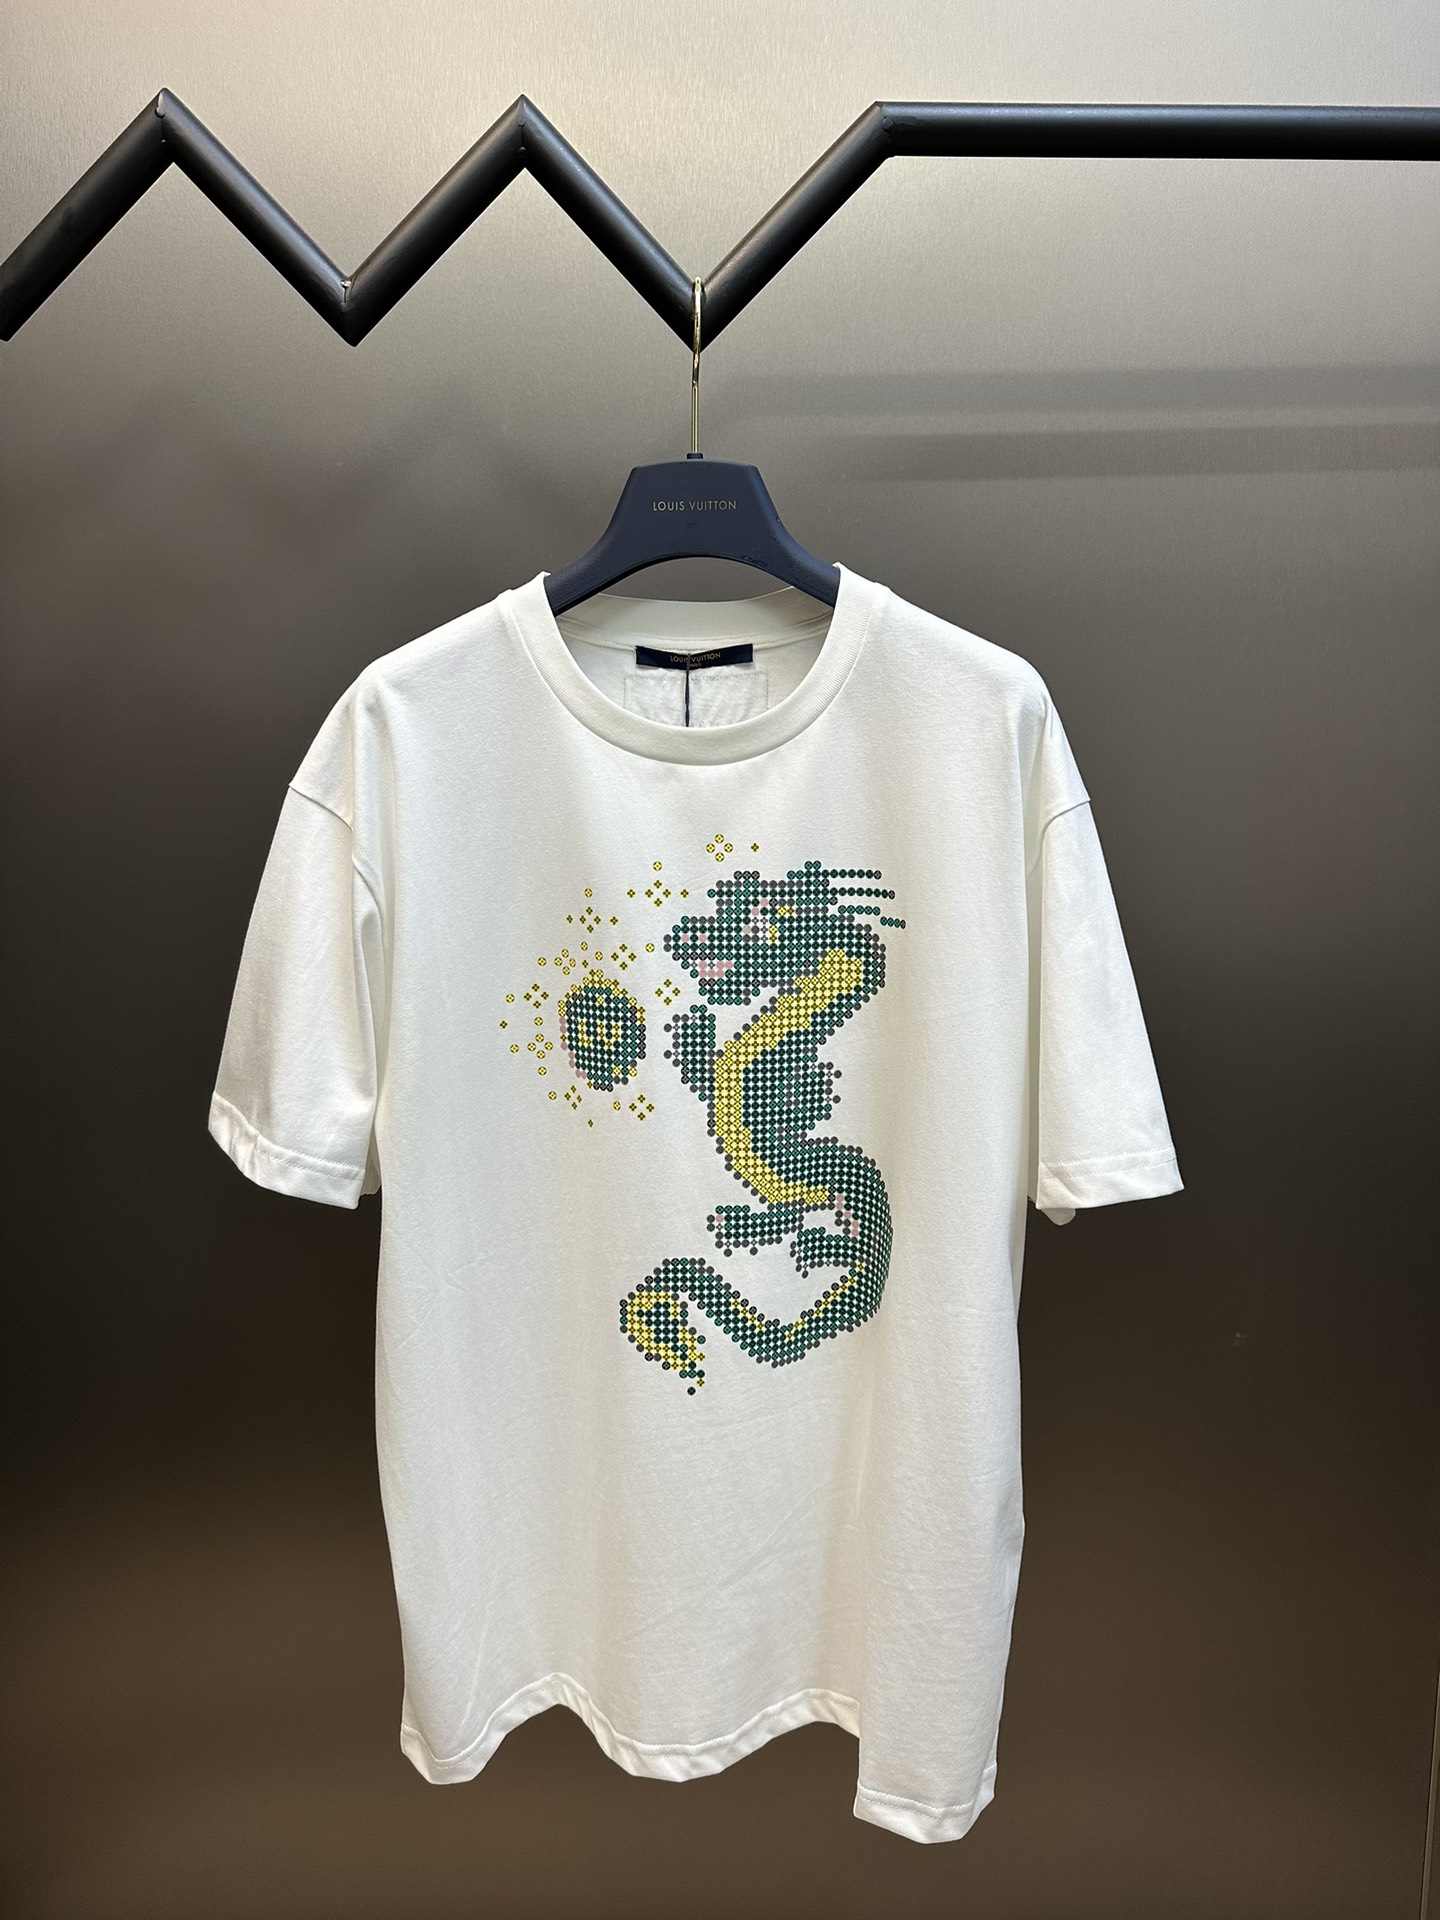 Louis Vuitton Clothing T-Shirt Printing Cotton Spring/Summer Collection Short Sleeve